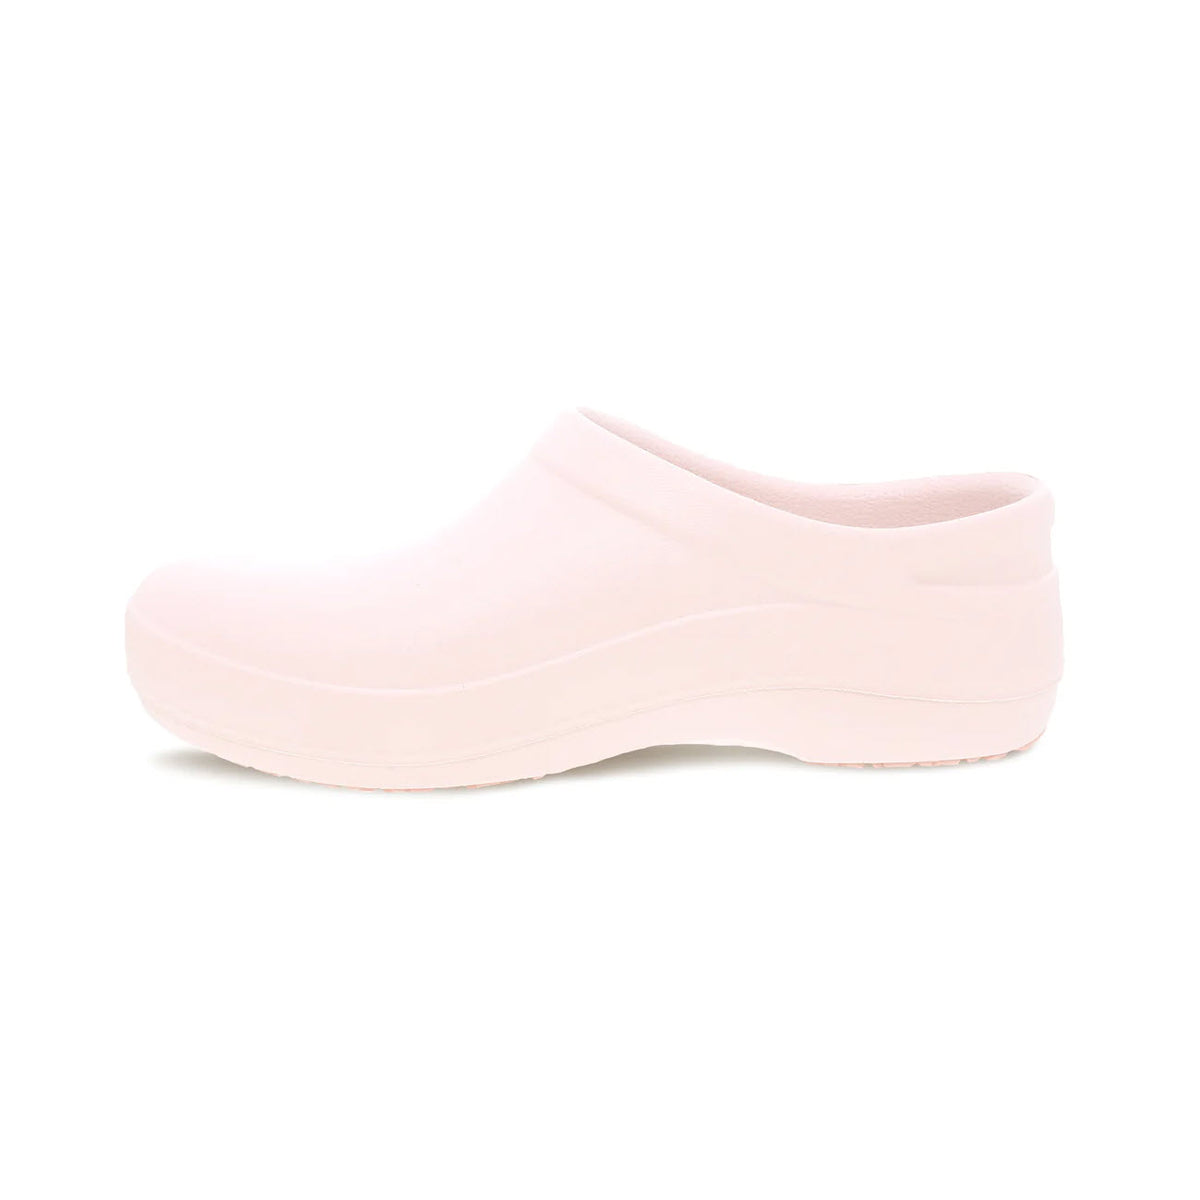 A single DANSKO KACI PINK - WOMENS clog-style shoe featuring Dansko Natural Arch technology, isolated on a white background.